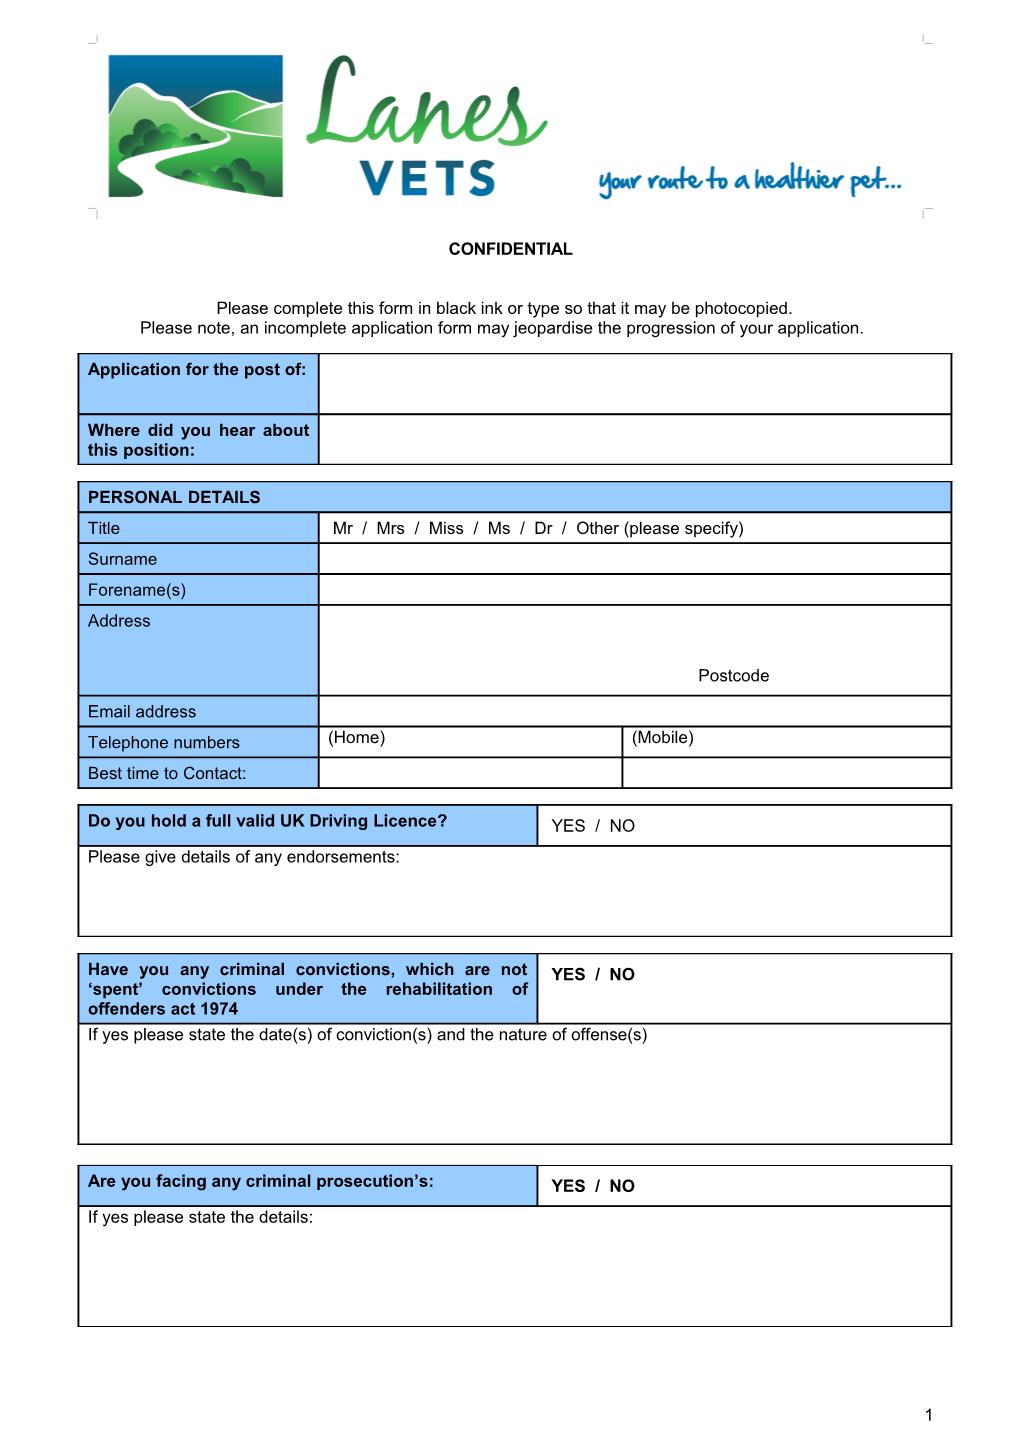 Please Complete This Form in Black Ink Or Type So That It May Be Photocopied